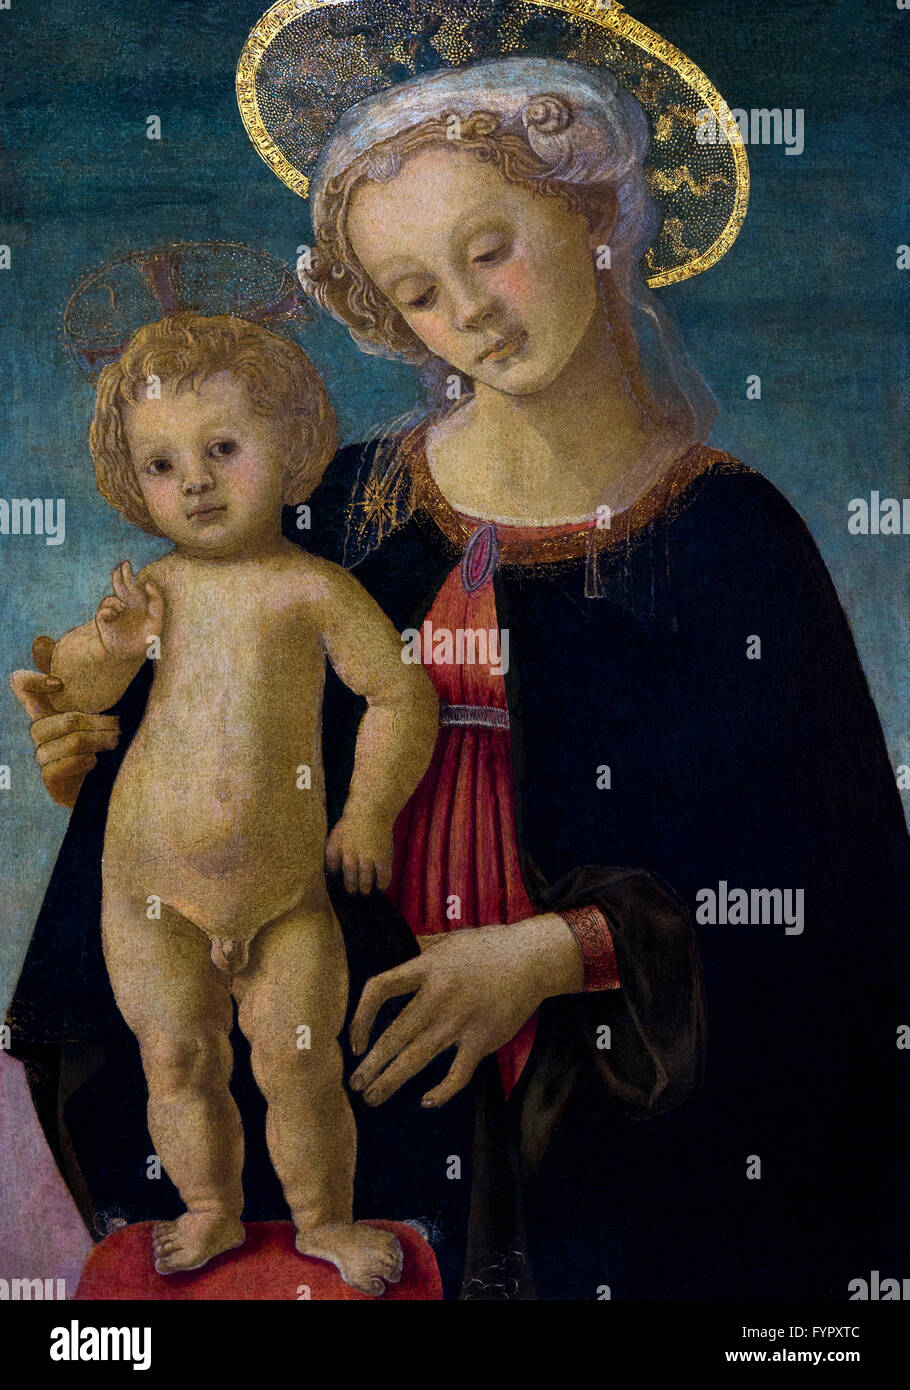 Virgin and Child,  by Sandro Botticelli, 1470,  Musee Jacquemart-Andre, Paris, France, Europe Stock Photo